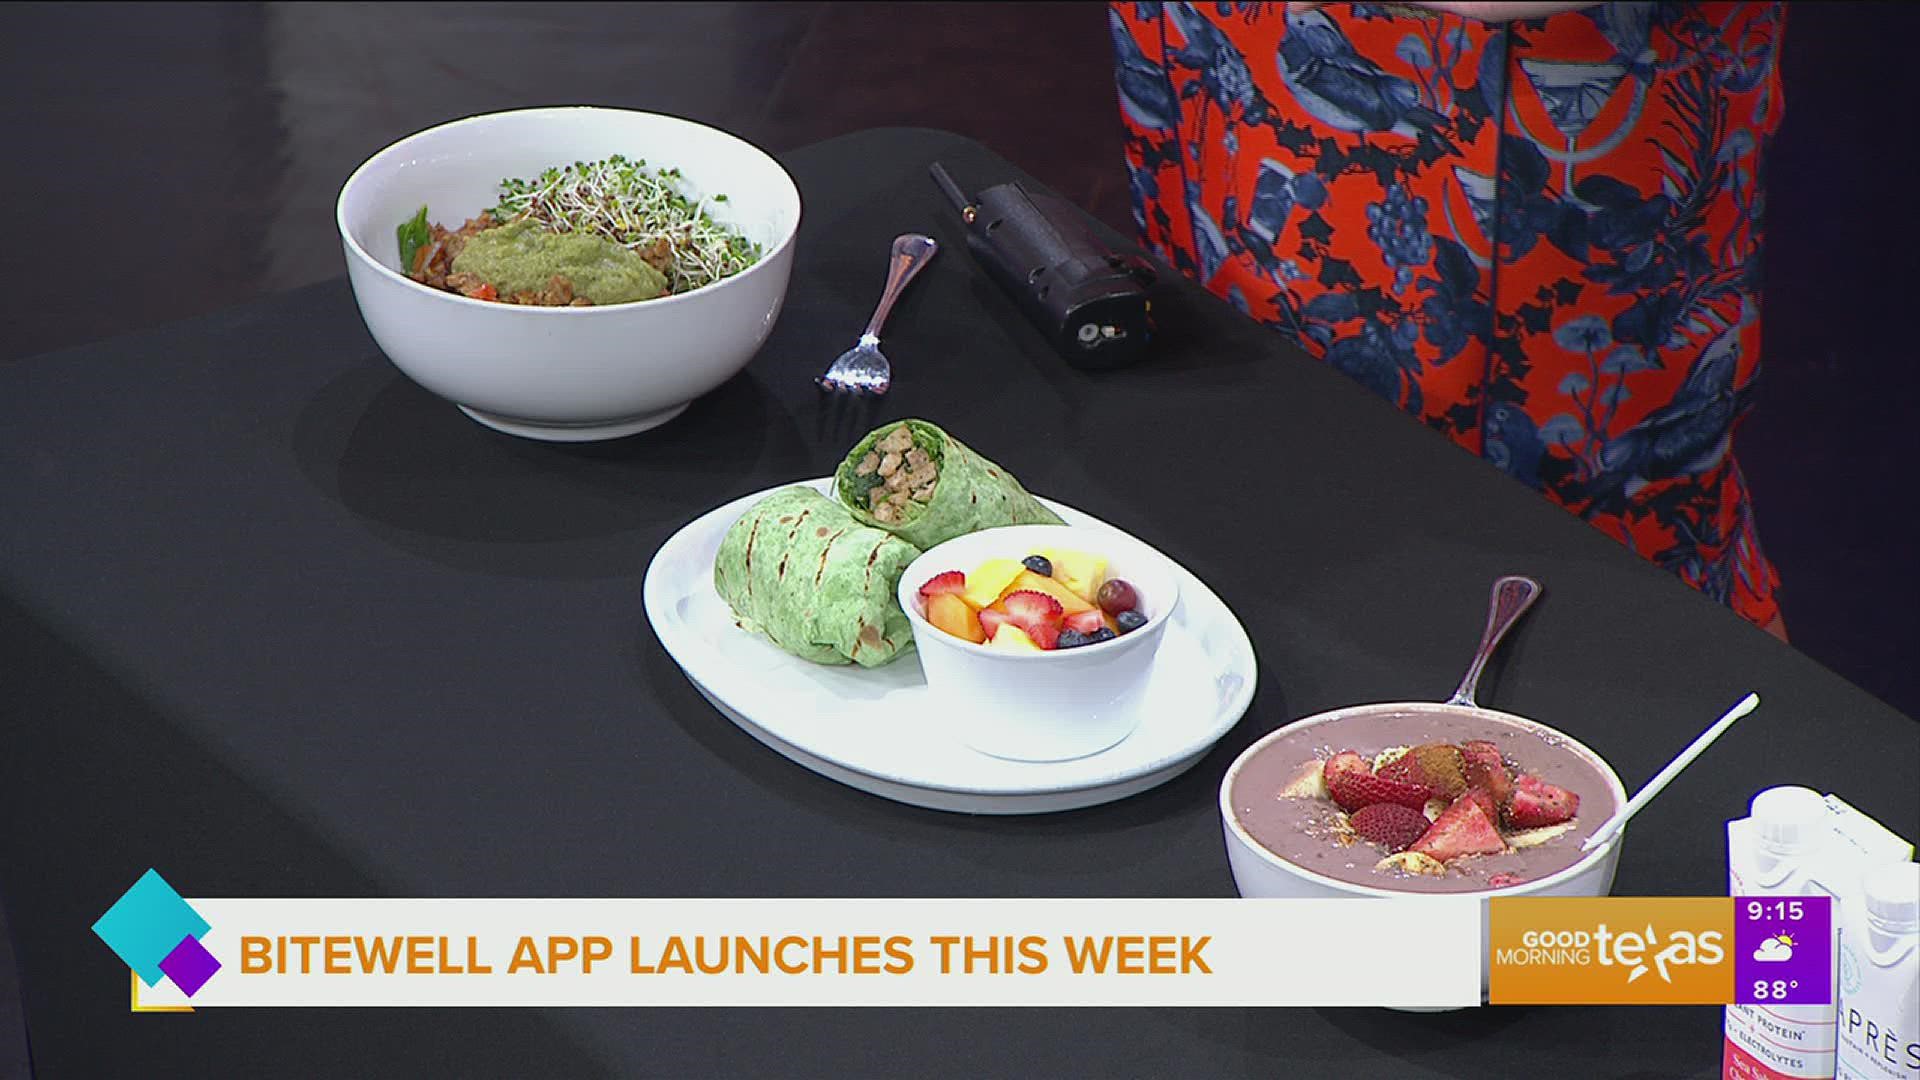 Just because you're going on vacation doesn't mean your healthy eating habits have to change.
This new app will help people eat healthy while on the go.